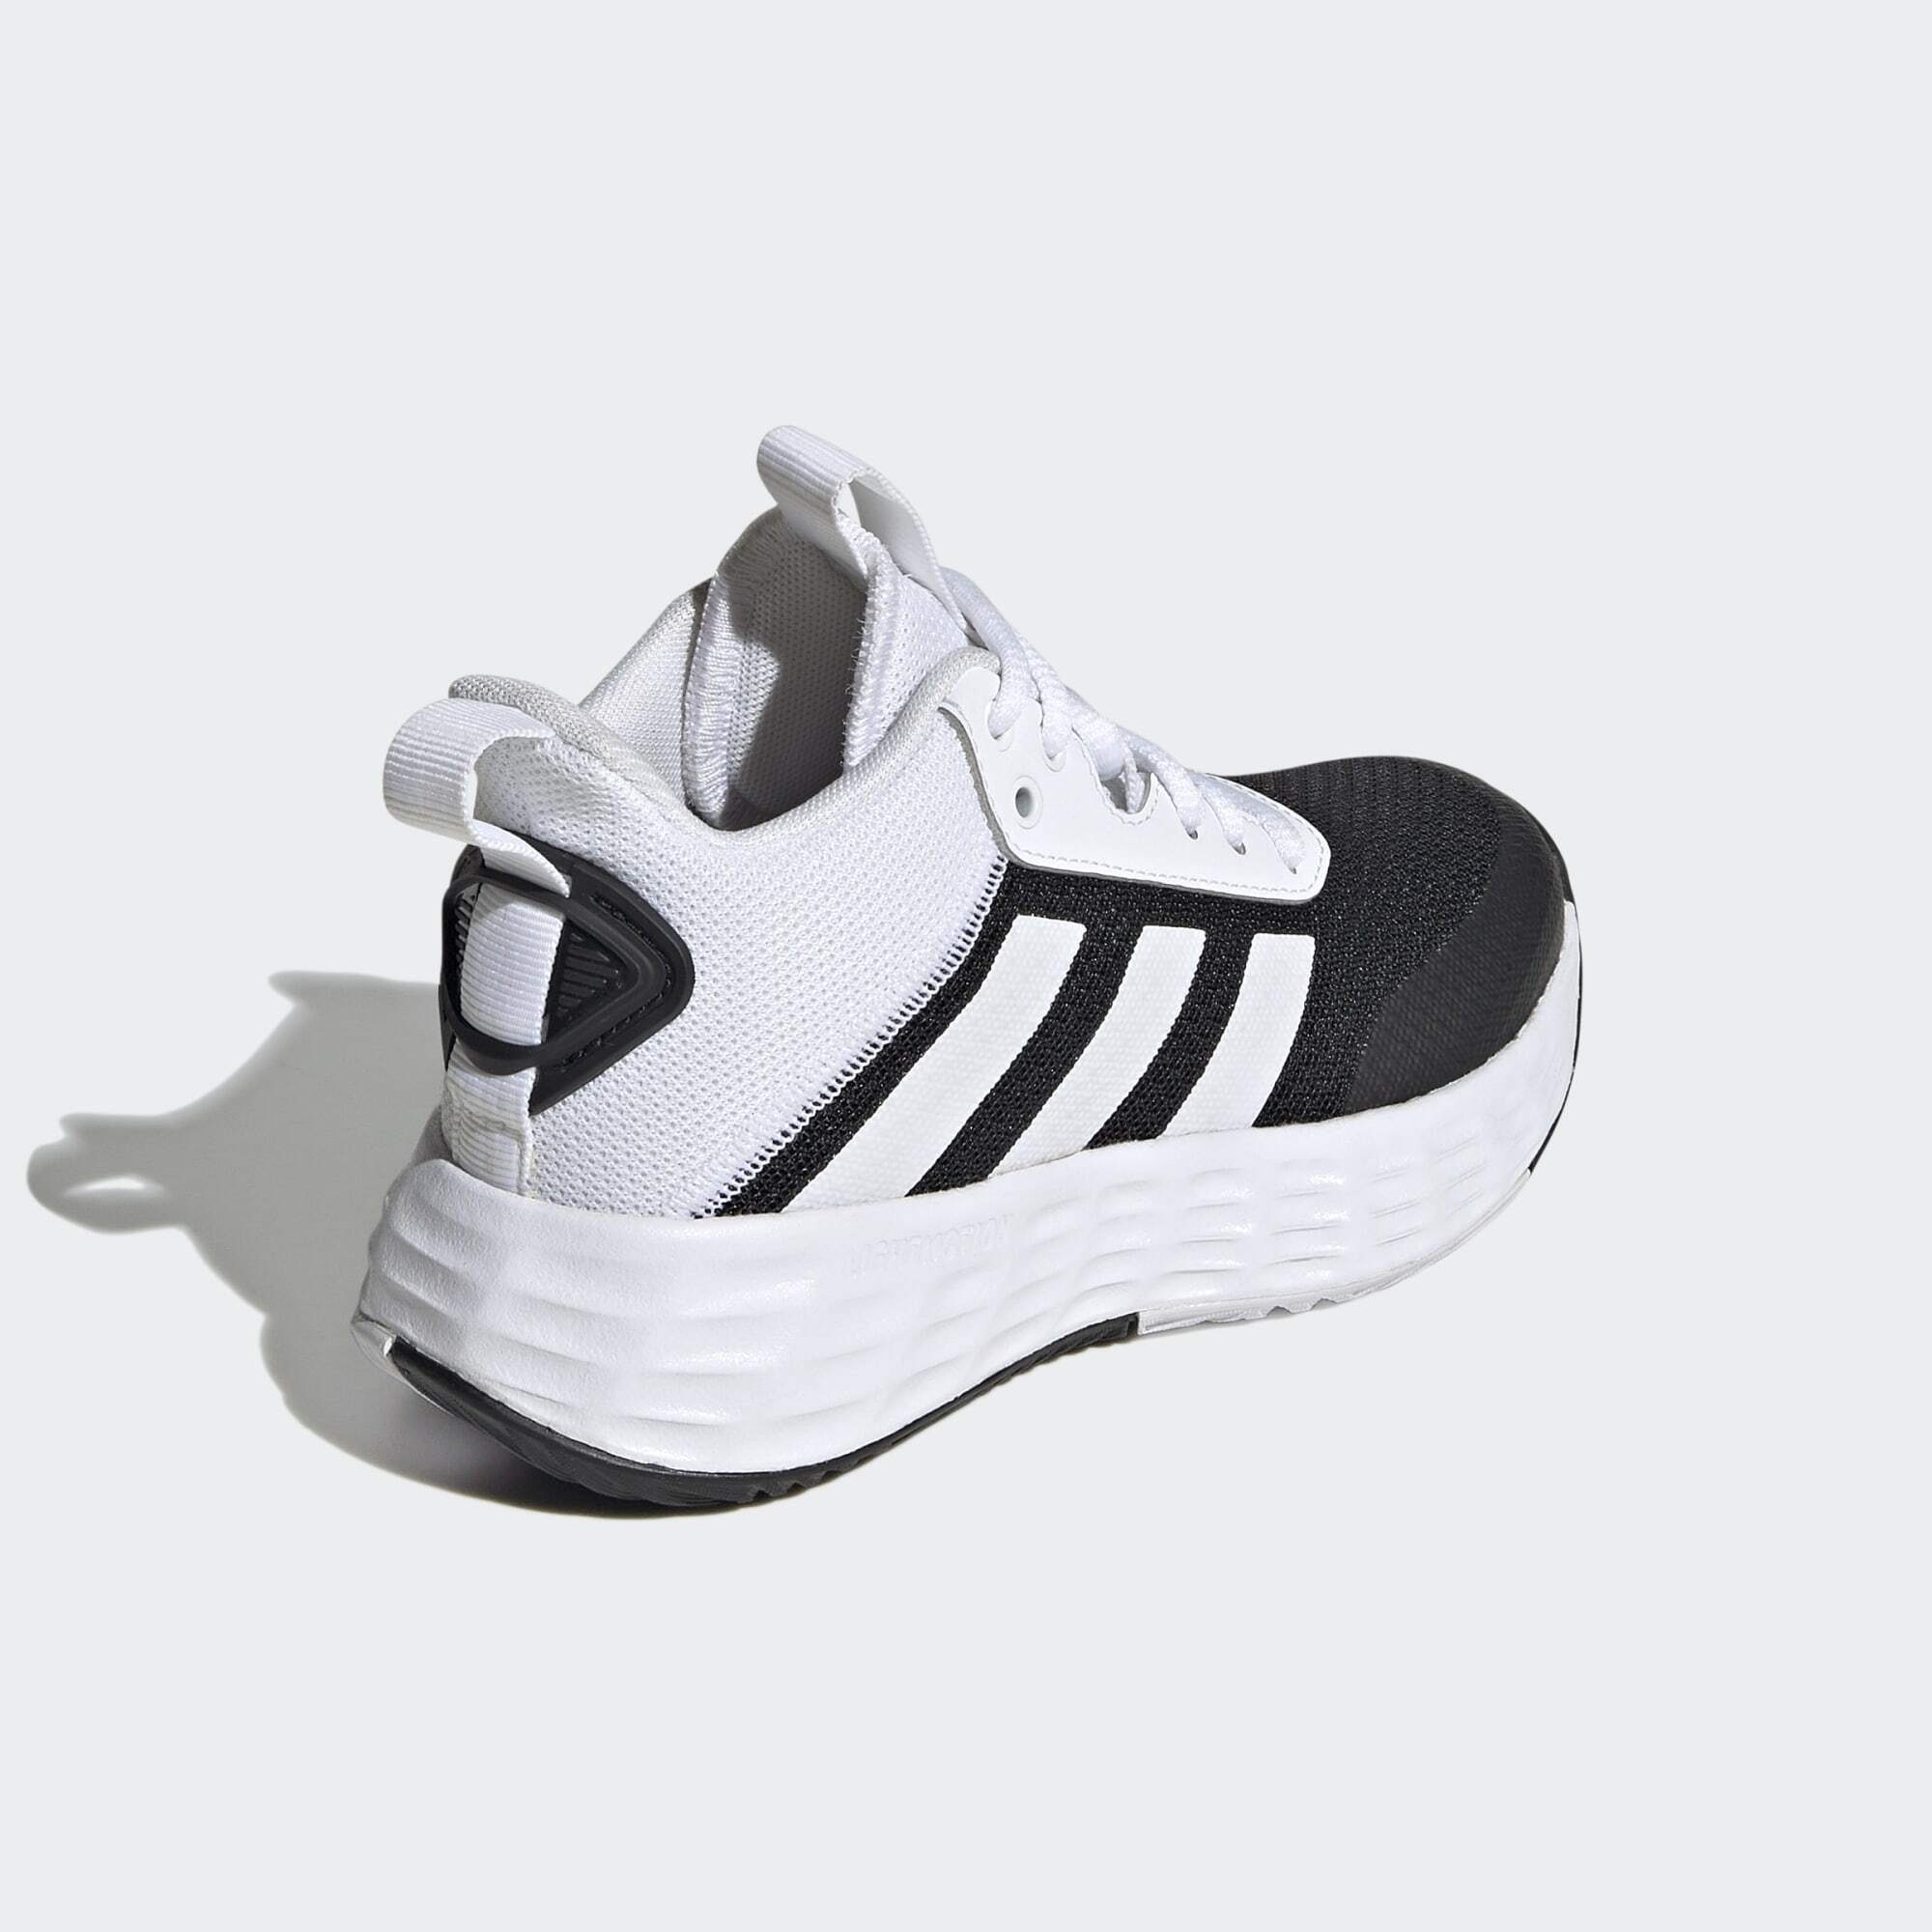 adidas Performance OWNTHEGAME Core / Cloud Black Core Basketballschuh / White BASKETBALLSCHUH 2.0 Black